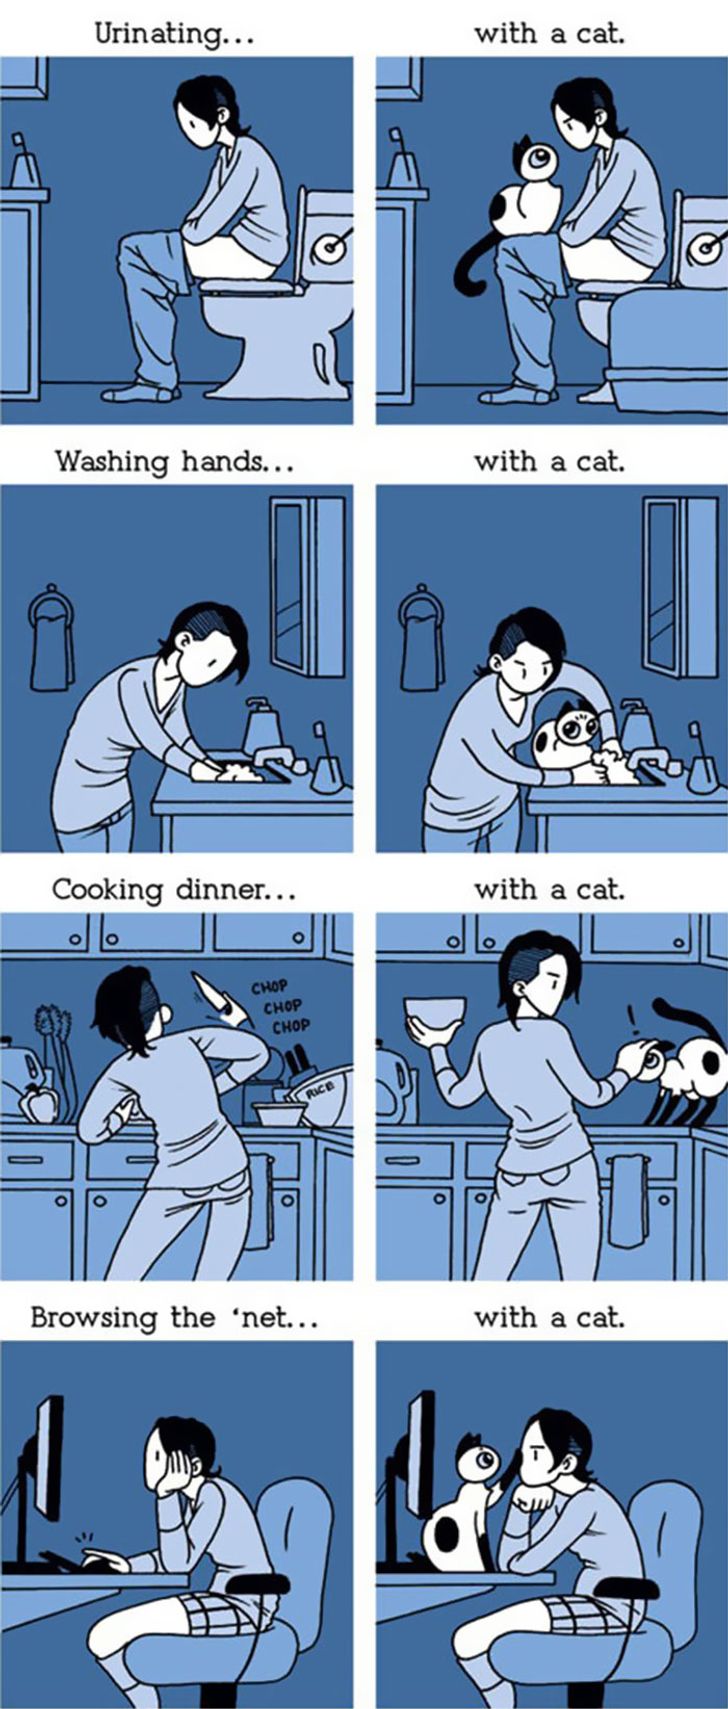 15 Hilarious Comic Strips Every Cat Owner Will Understand